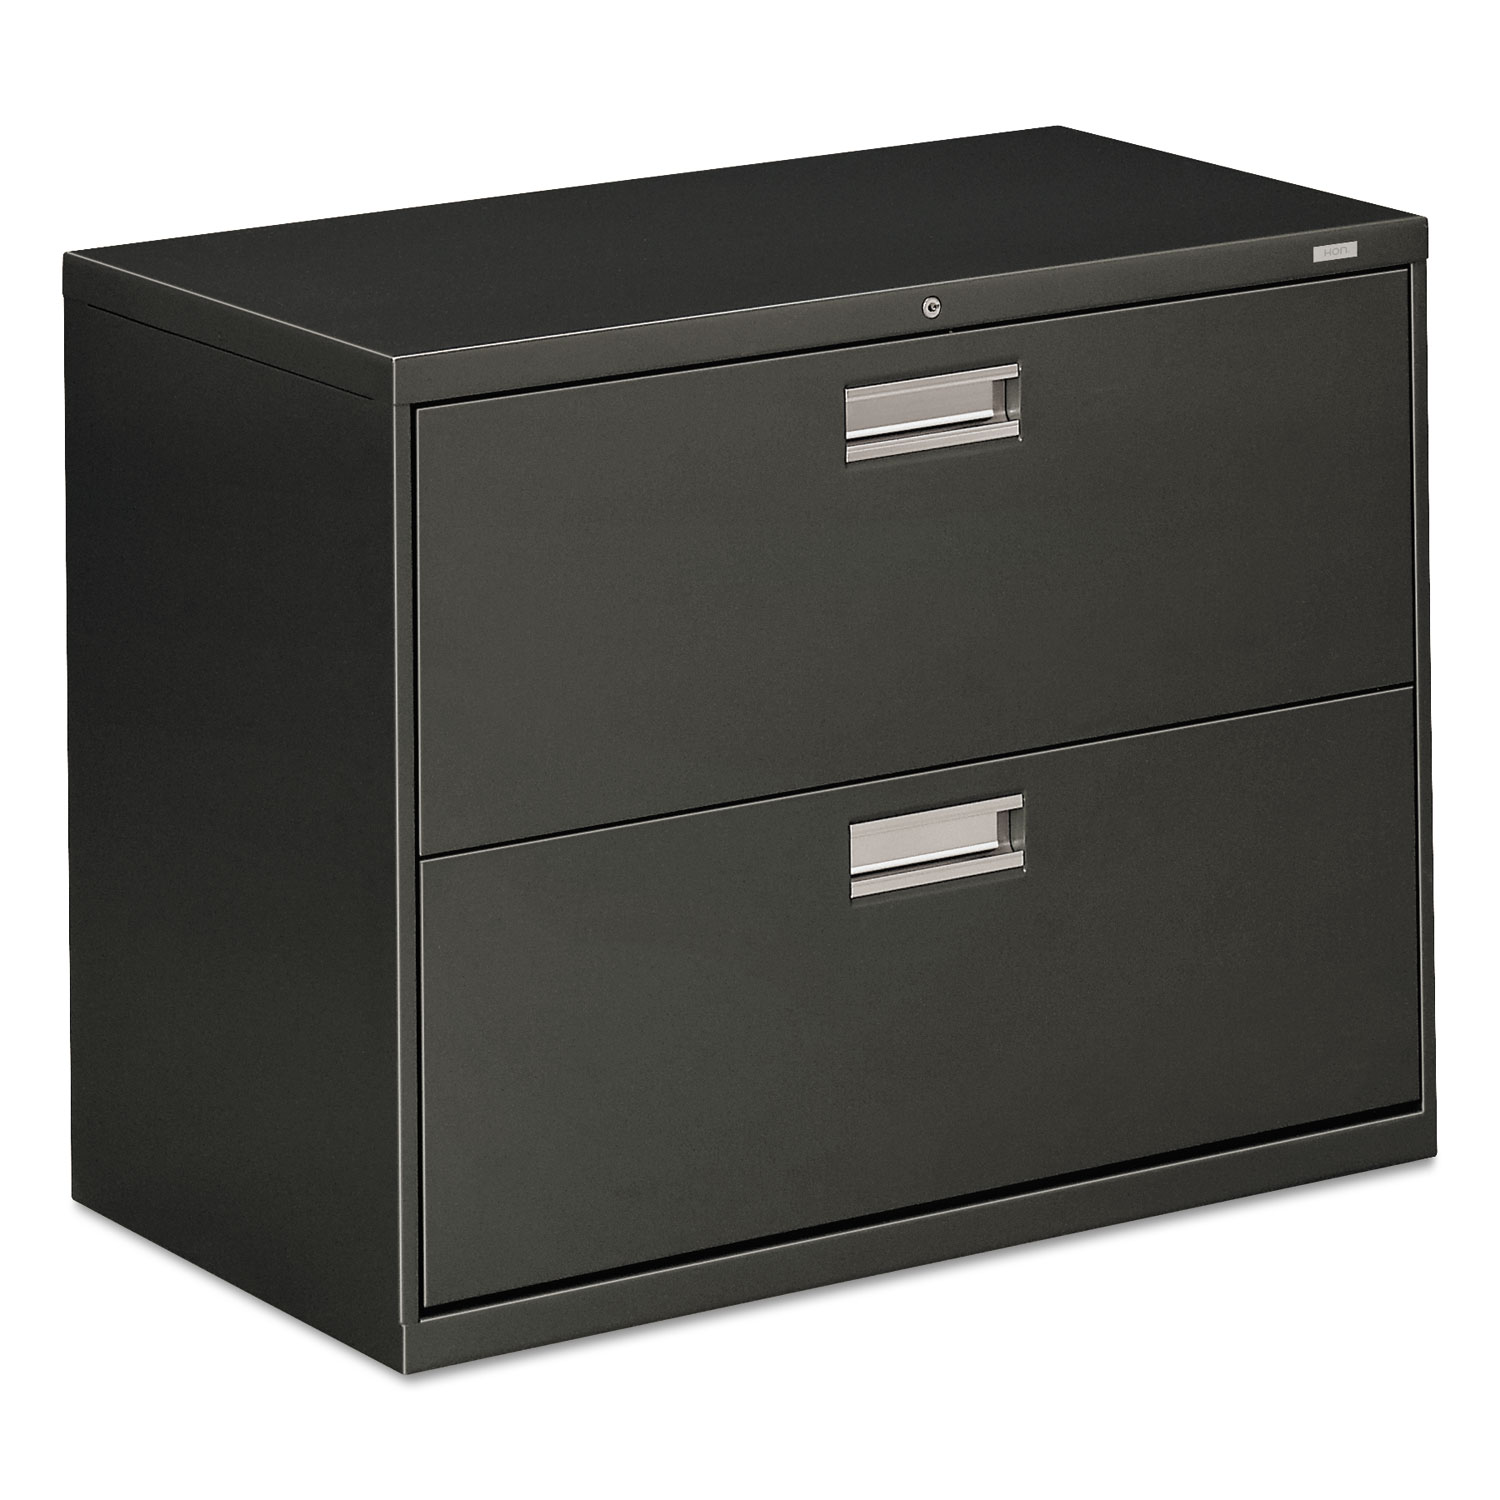  HON H682.L.S 600 Series Two-Drawer Lateral File, 36w x 18d x 28h, Charcoal (HON682LS) 